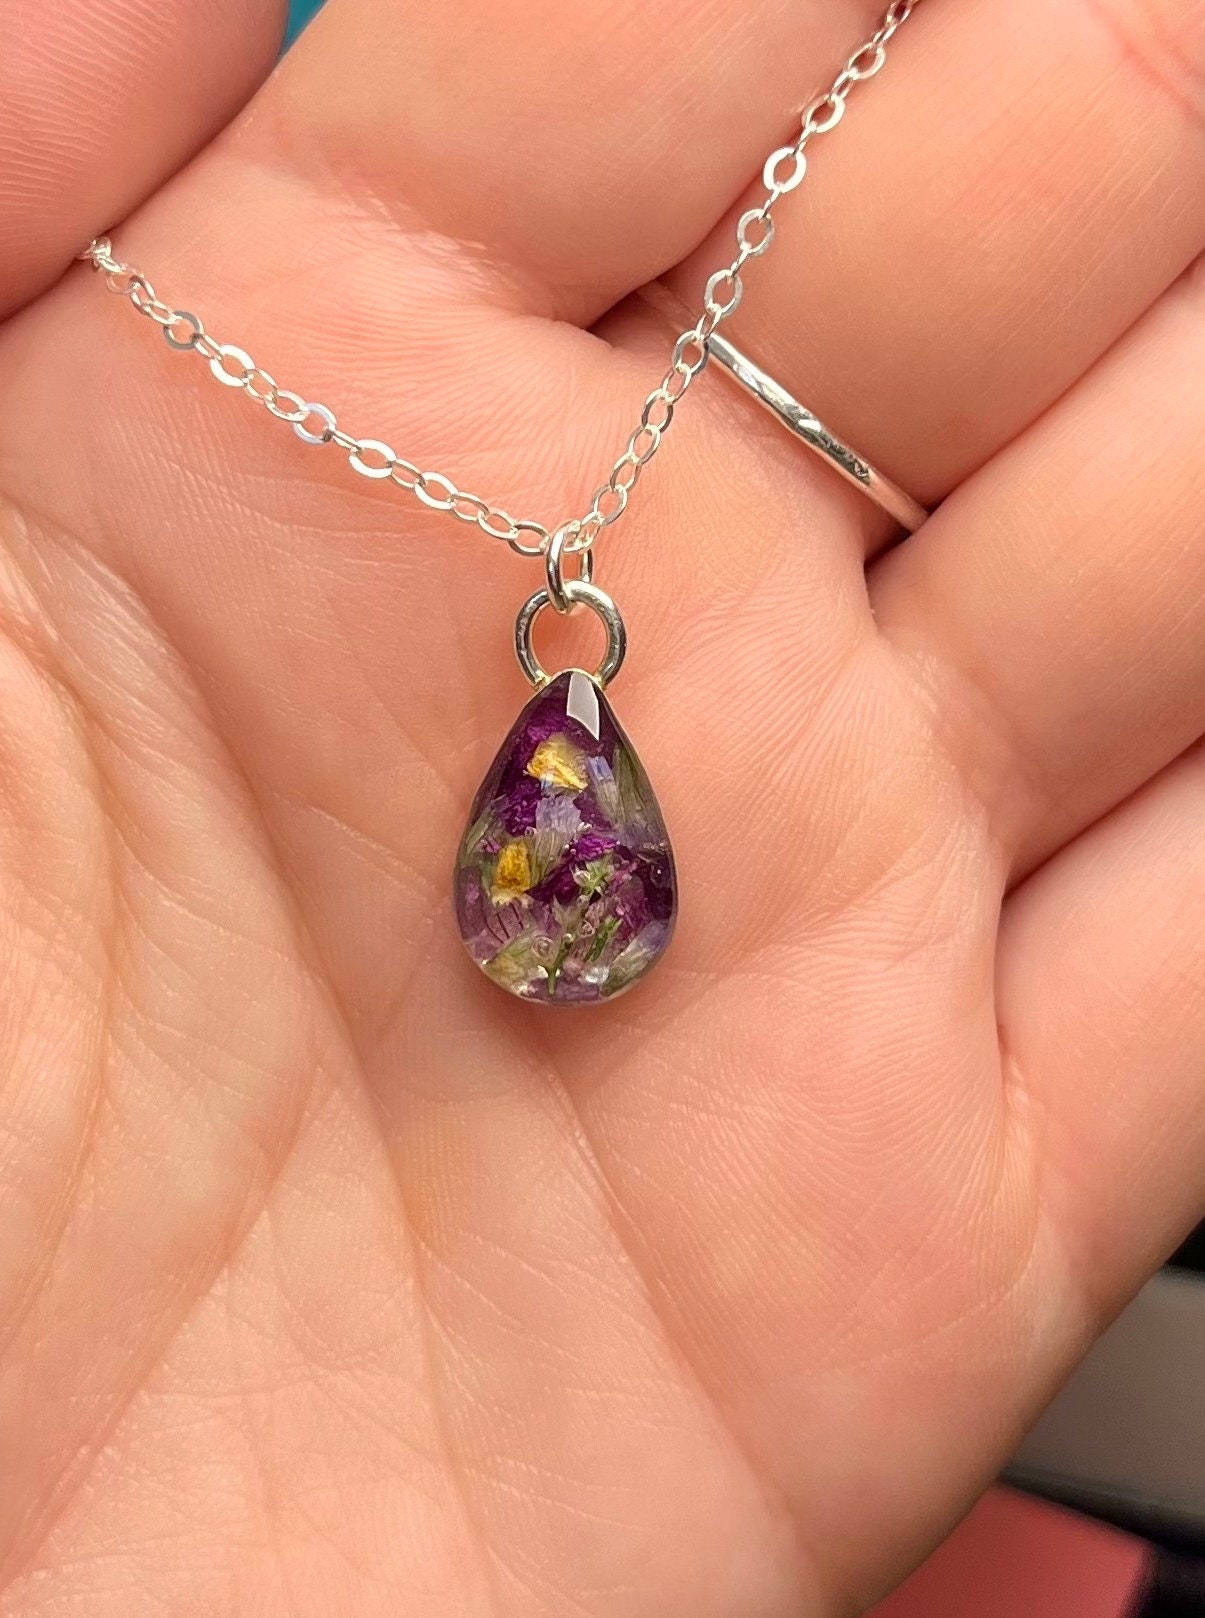 Real Dried Flowers and Resin Necklace, Small Gold Teardrop in Purples 14